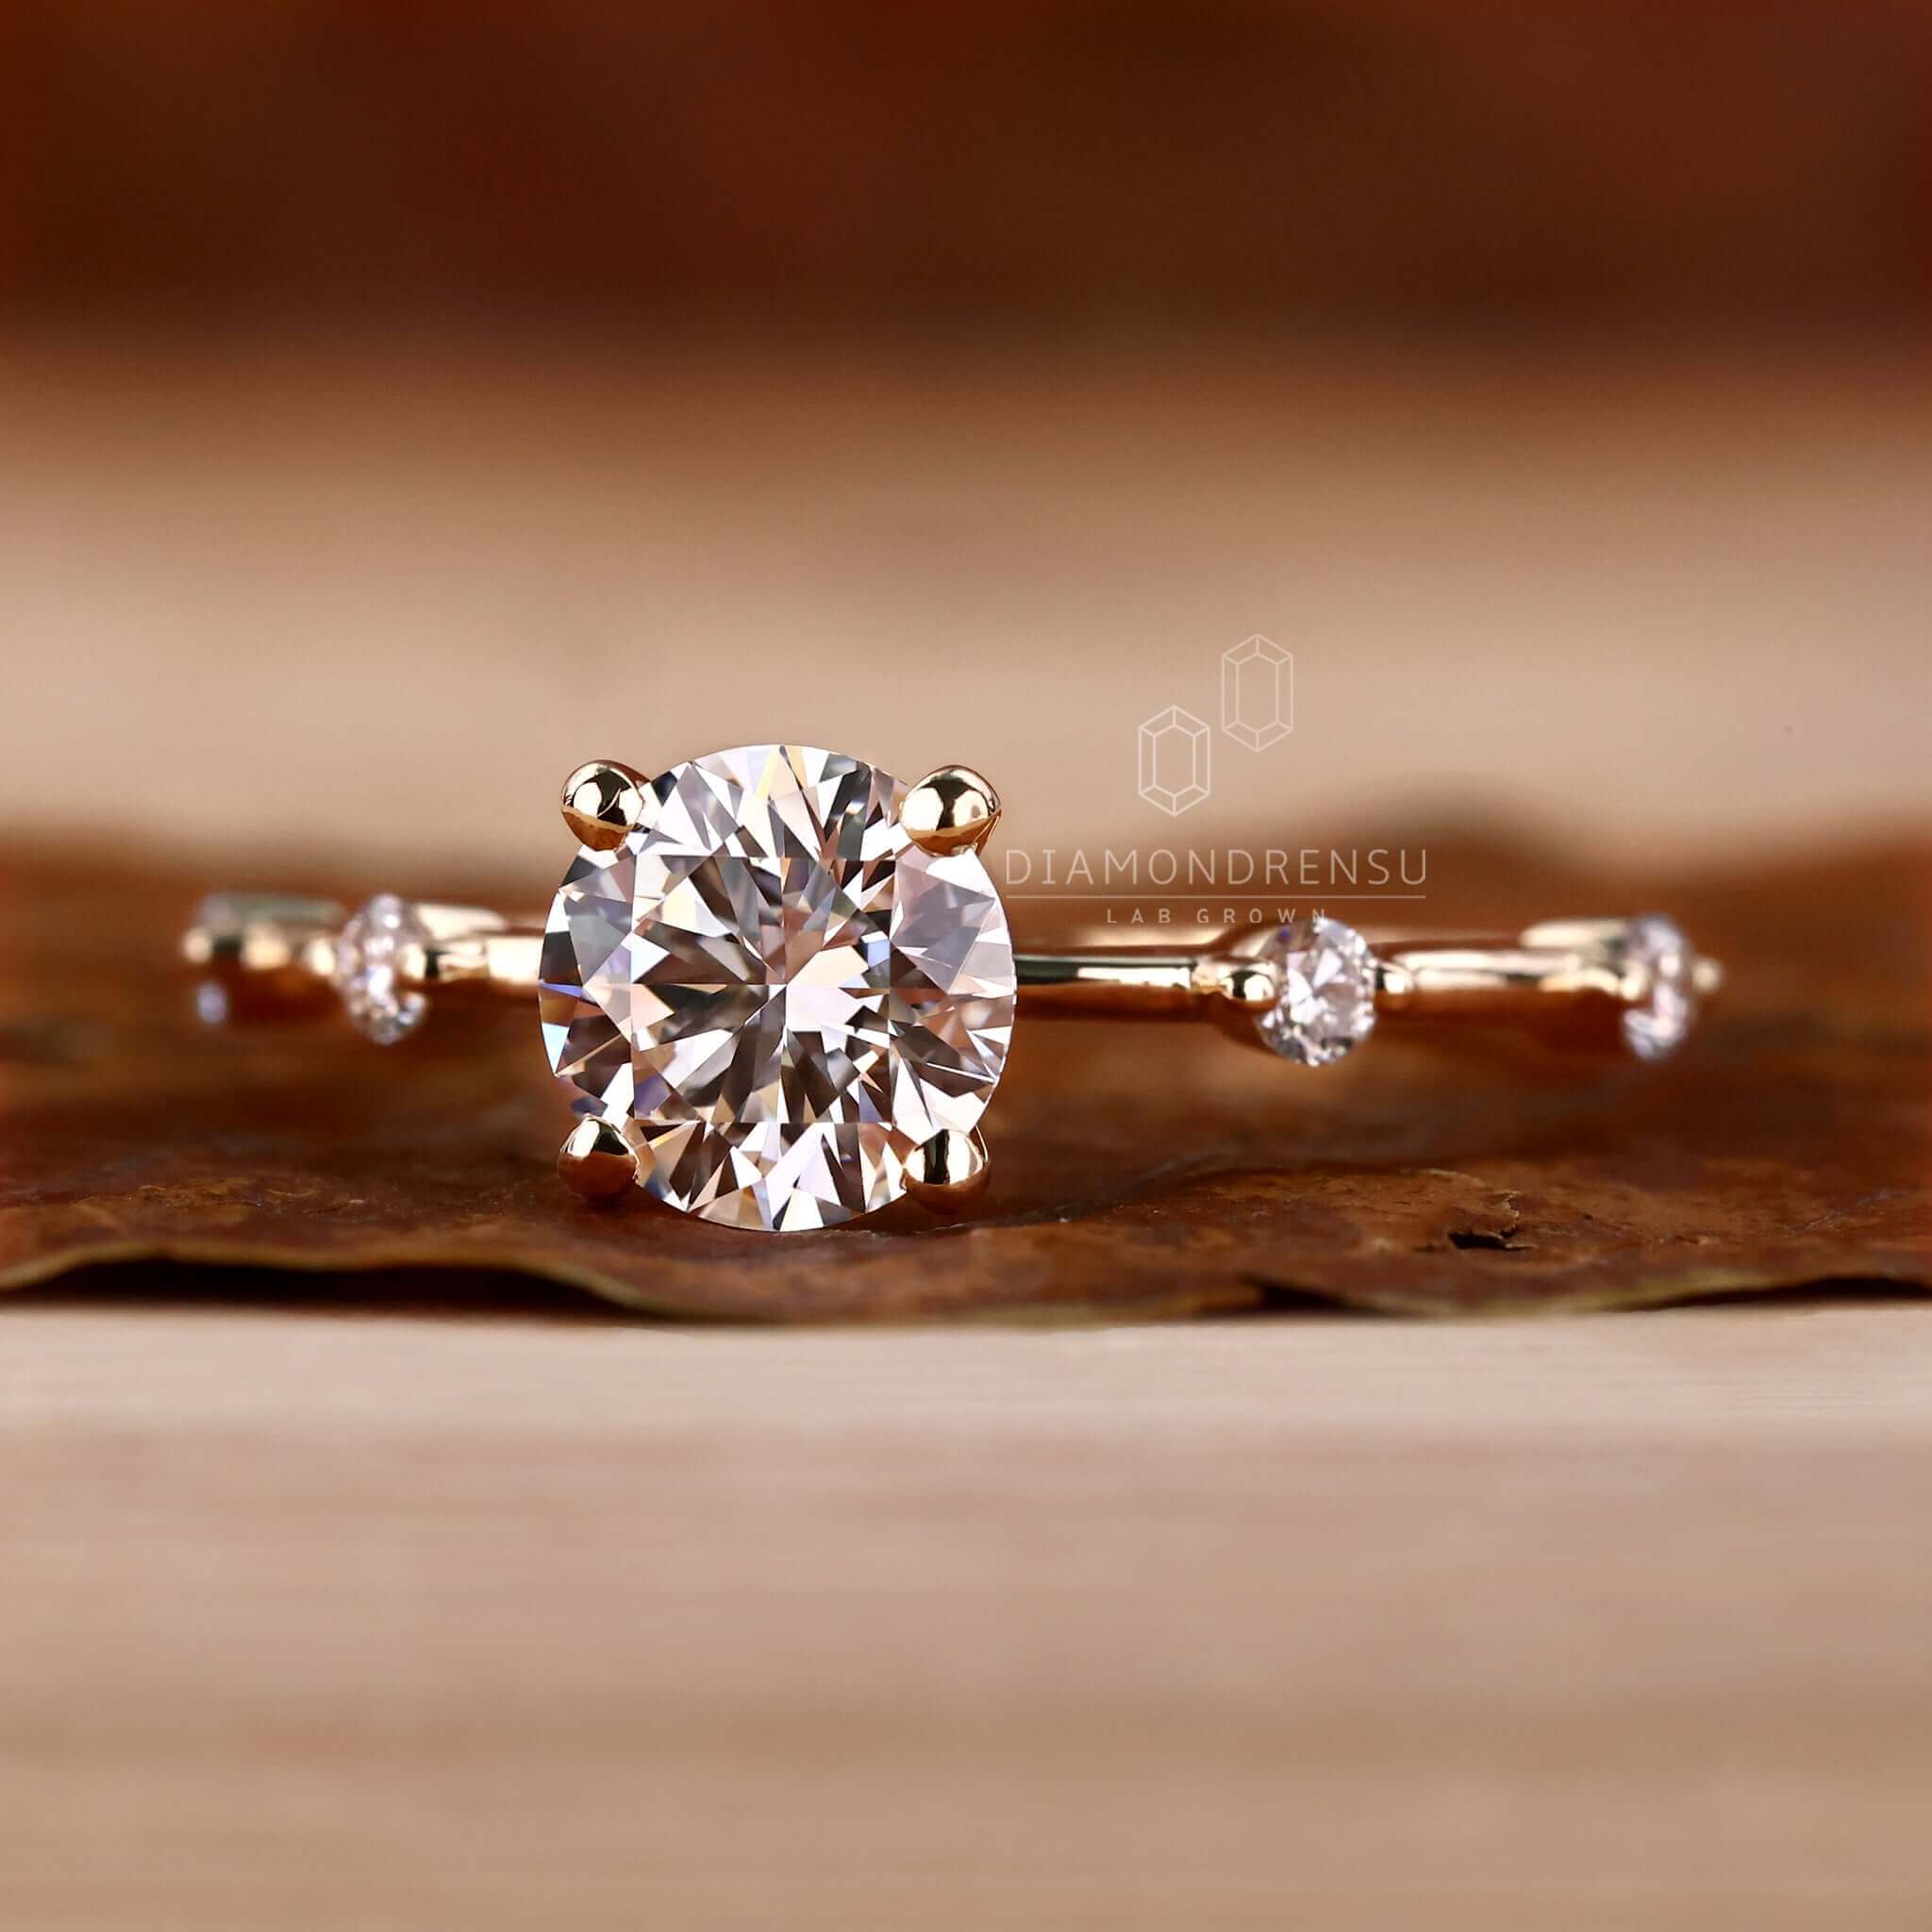 distance pave engagement ring